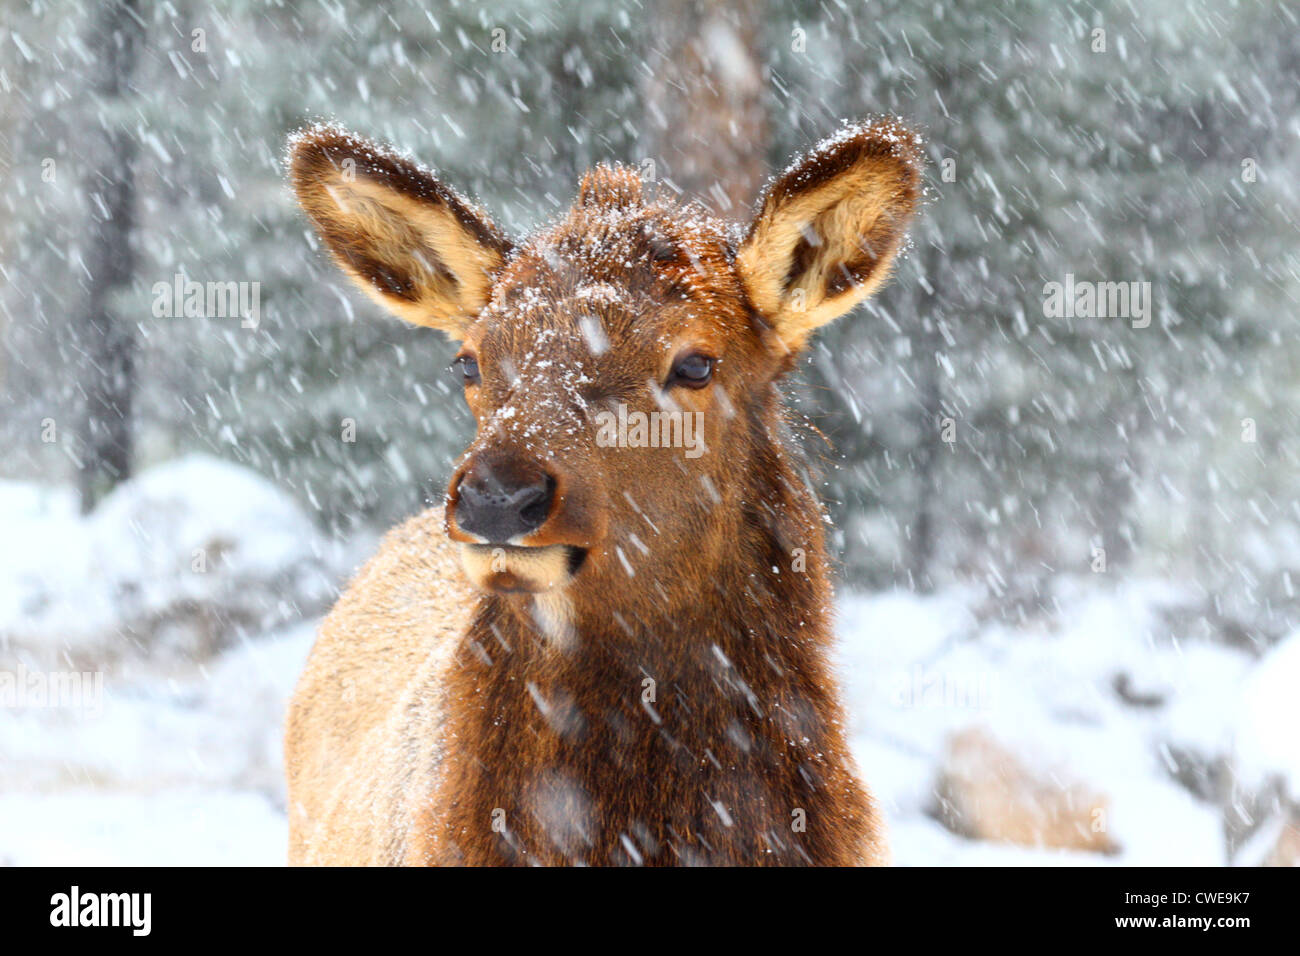 40,933.06473 Young elk (Cervus elaphus) standing in a forested area in a heavy winter snowstorm, staring alertly off into the distance. Stock Photo